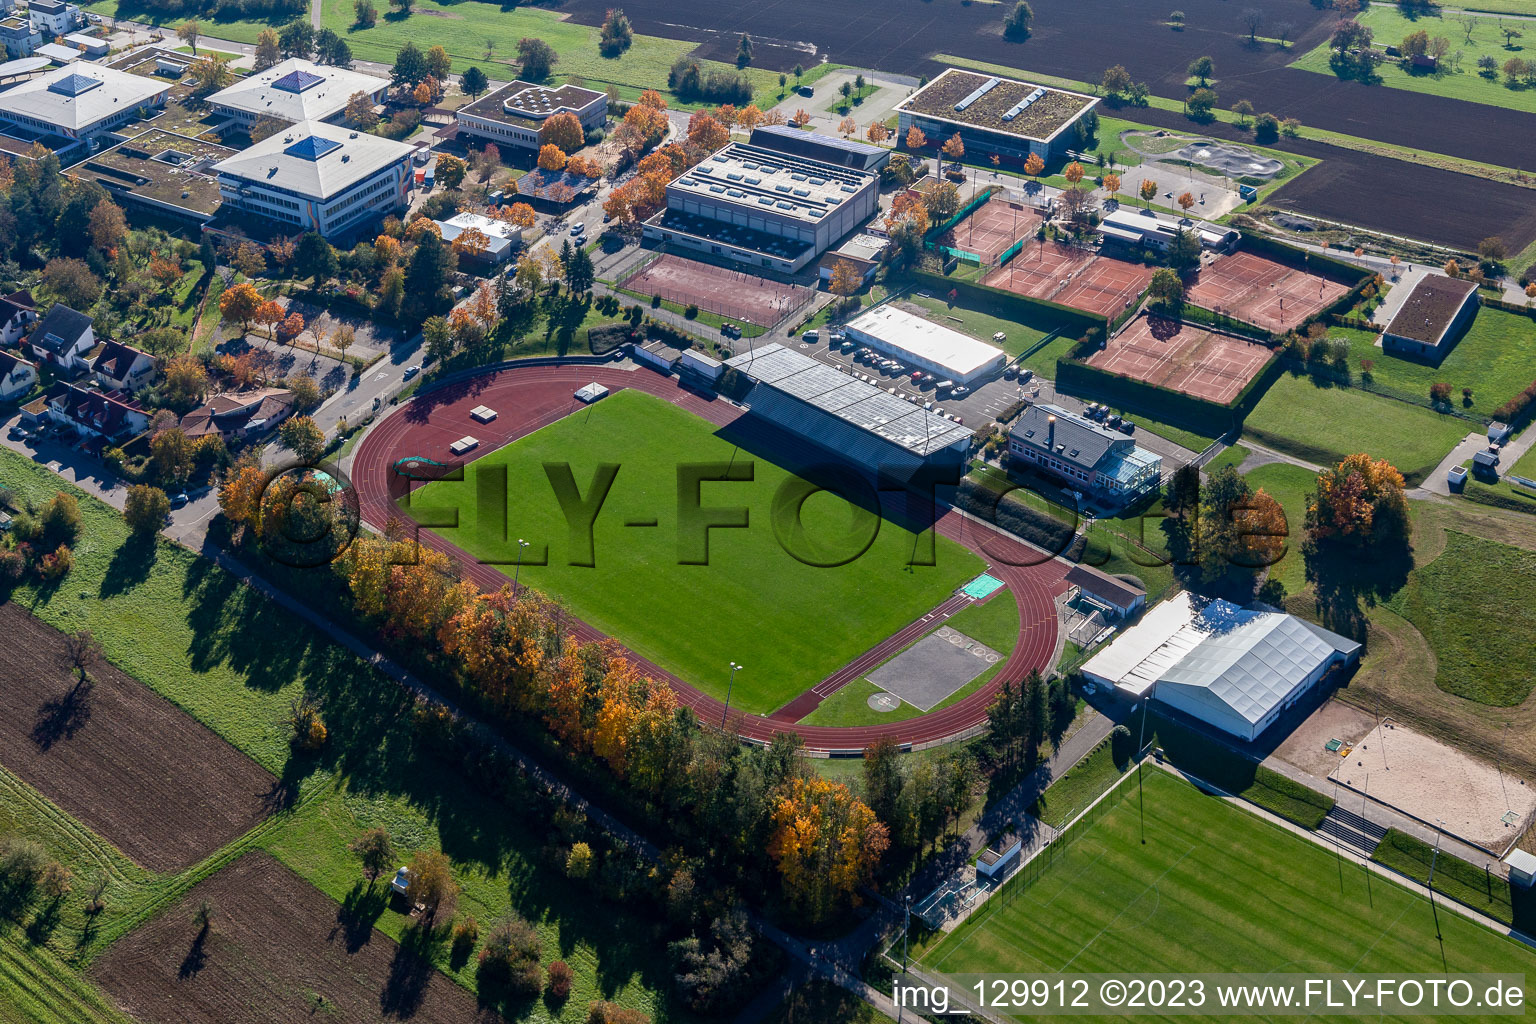 Stadium in the SONOTRONIC Sportpark SV 1899 Langensteinbach in the district Langensteinbach in Karlsbad in the state Baden-Wuerttemberg, Germany